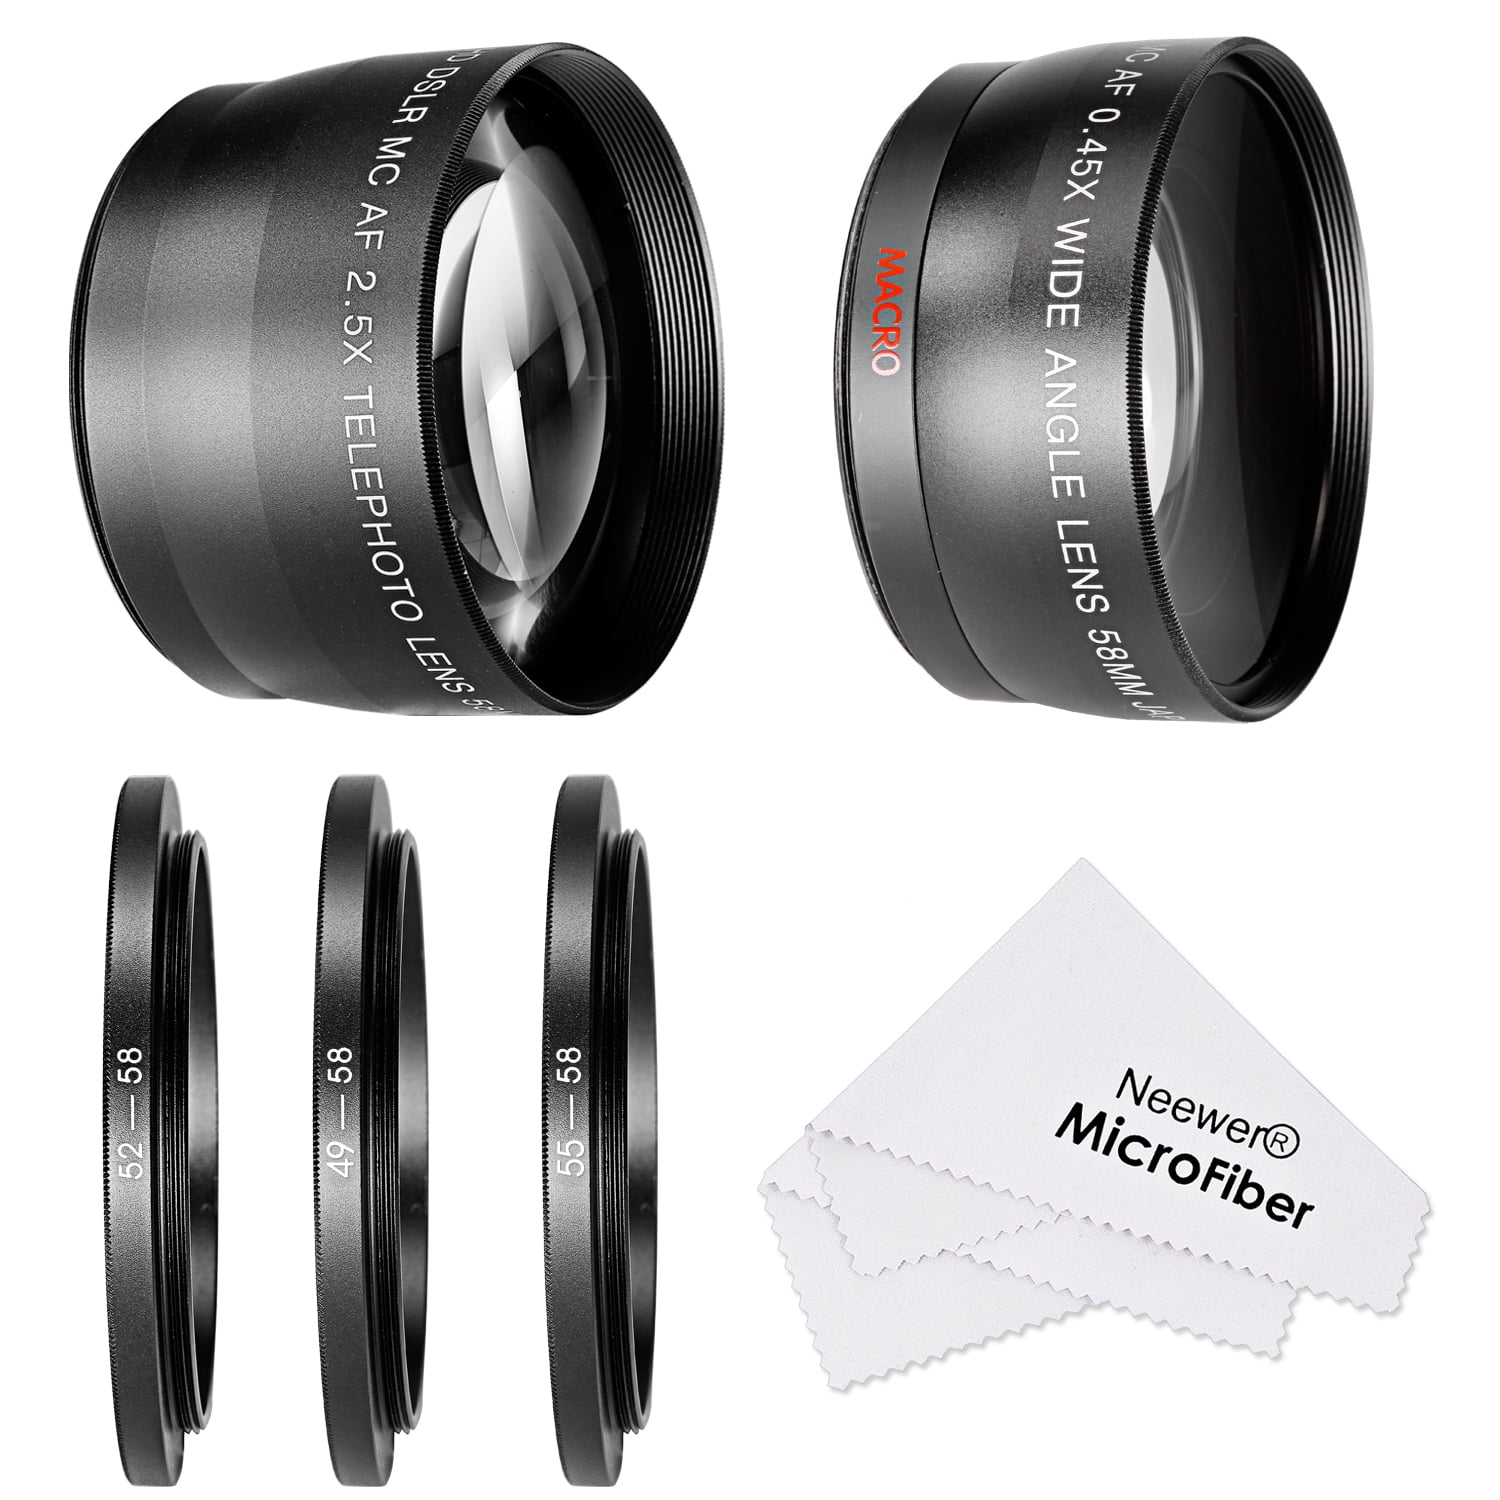 UK 58mm wide angle Lens 0.45x wiith Macro for Canon 18-55mm lens all versions 